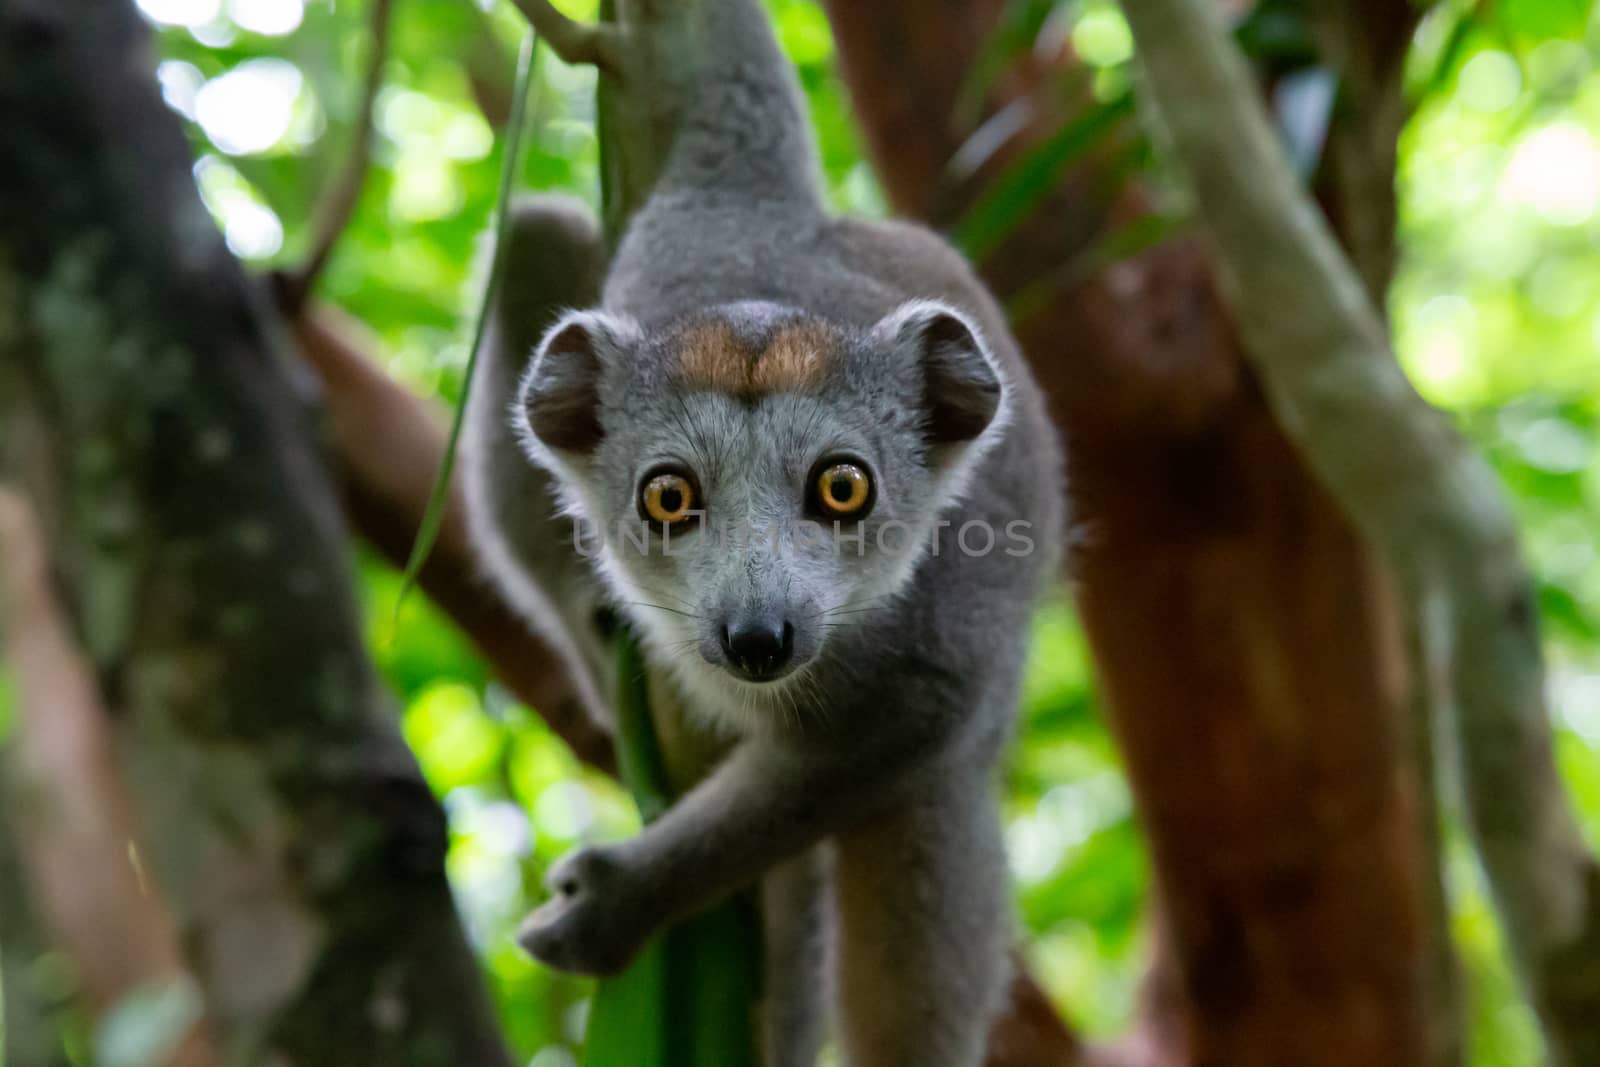 One crown lemur crawls on the branches of a tree